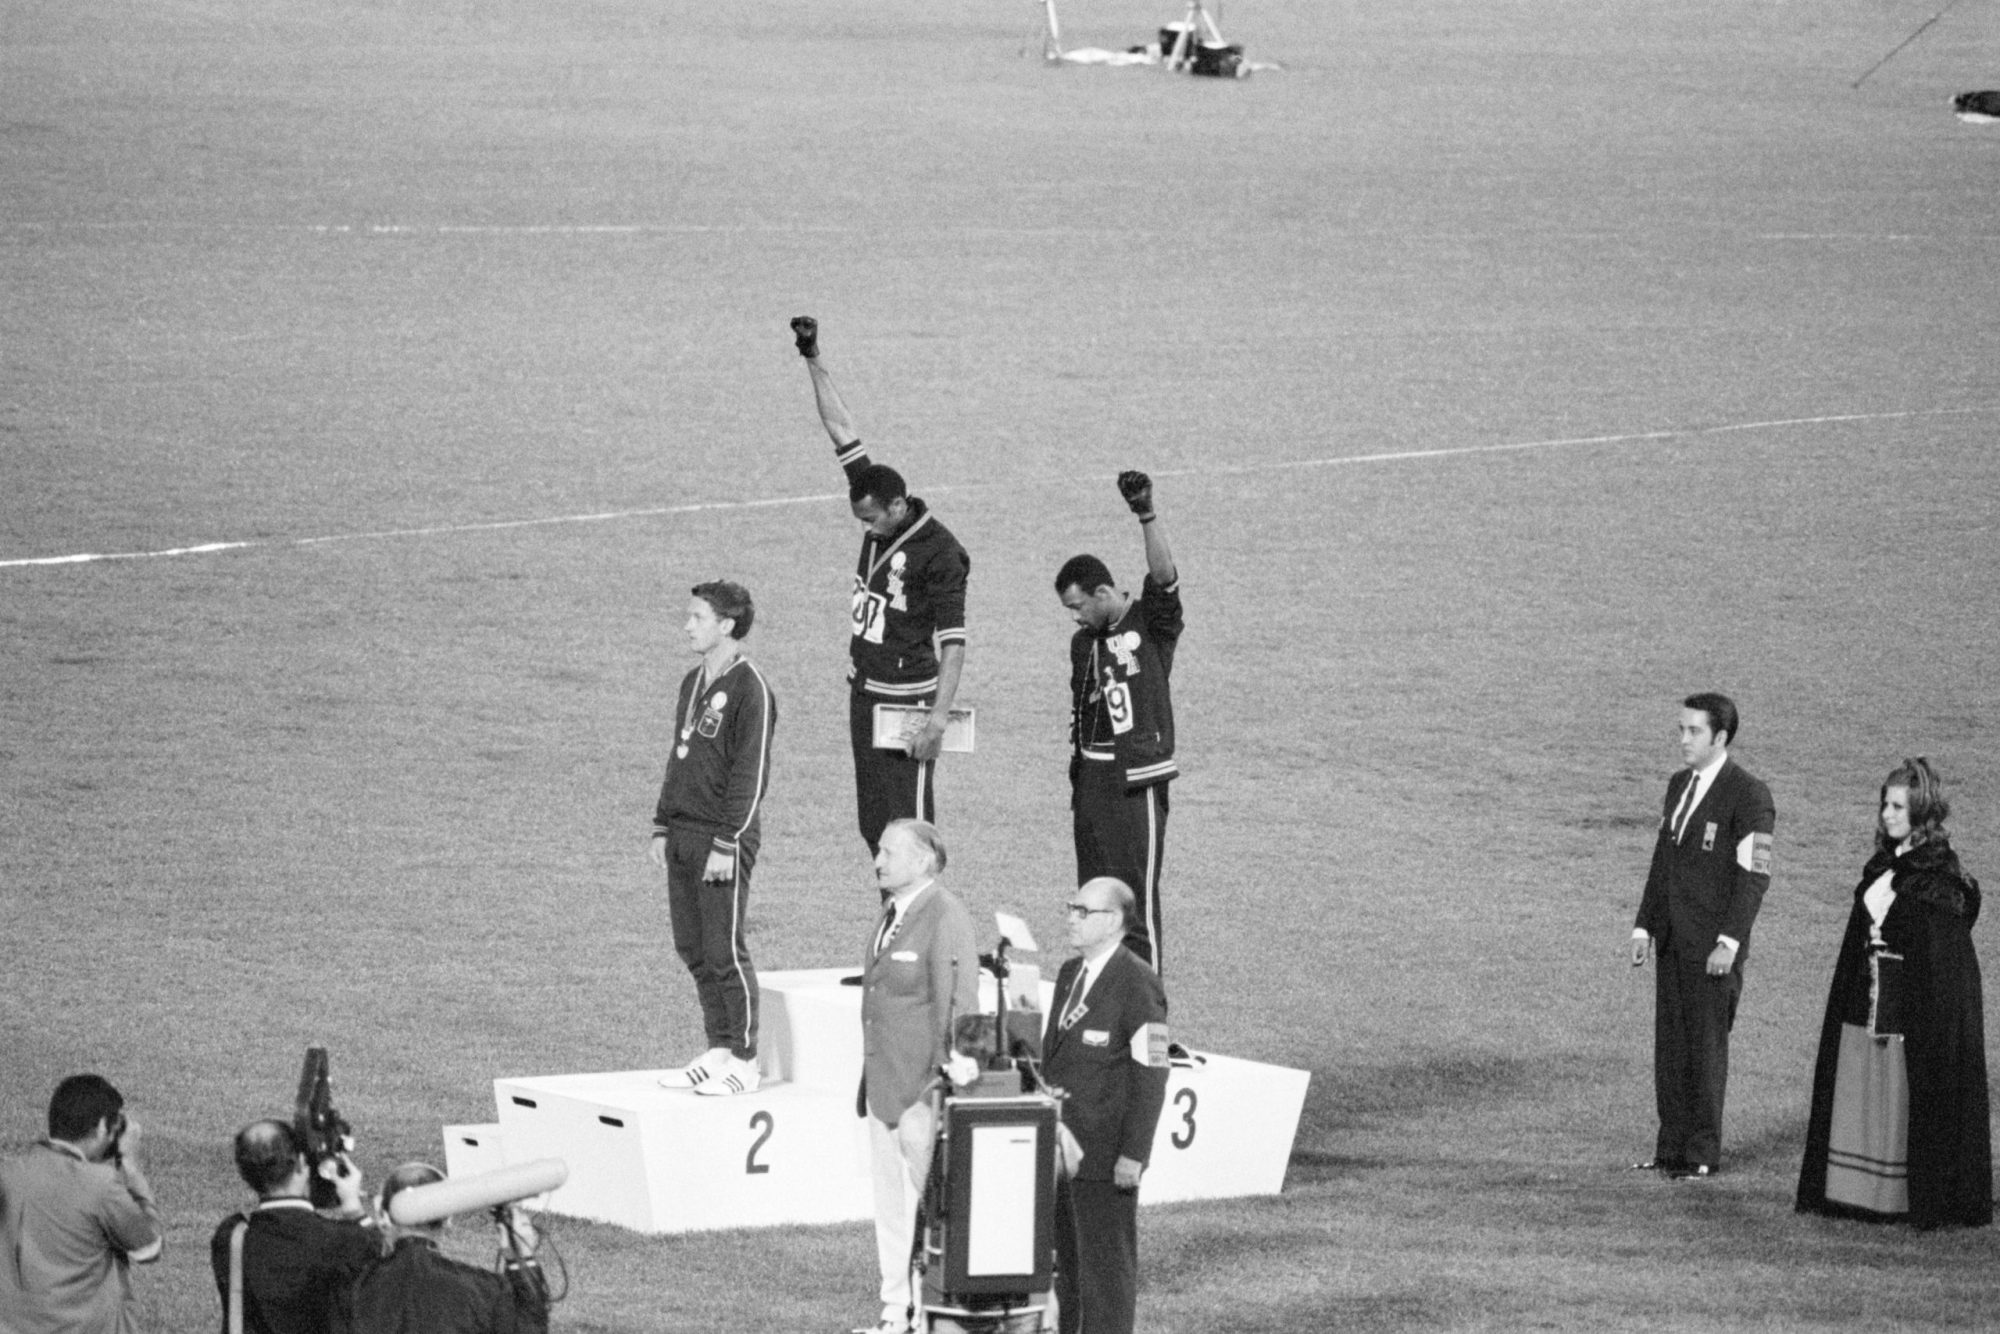 Tommie Smith and John Carlos, gold and bronze medalists in the 200-meter run at the 1968 Olympic Games, engage in a victory stand protest against unfair treatment of blacks in the United States.